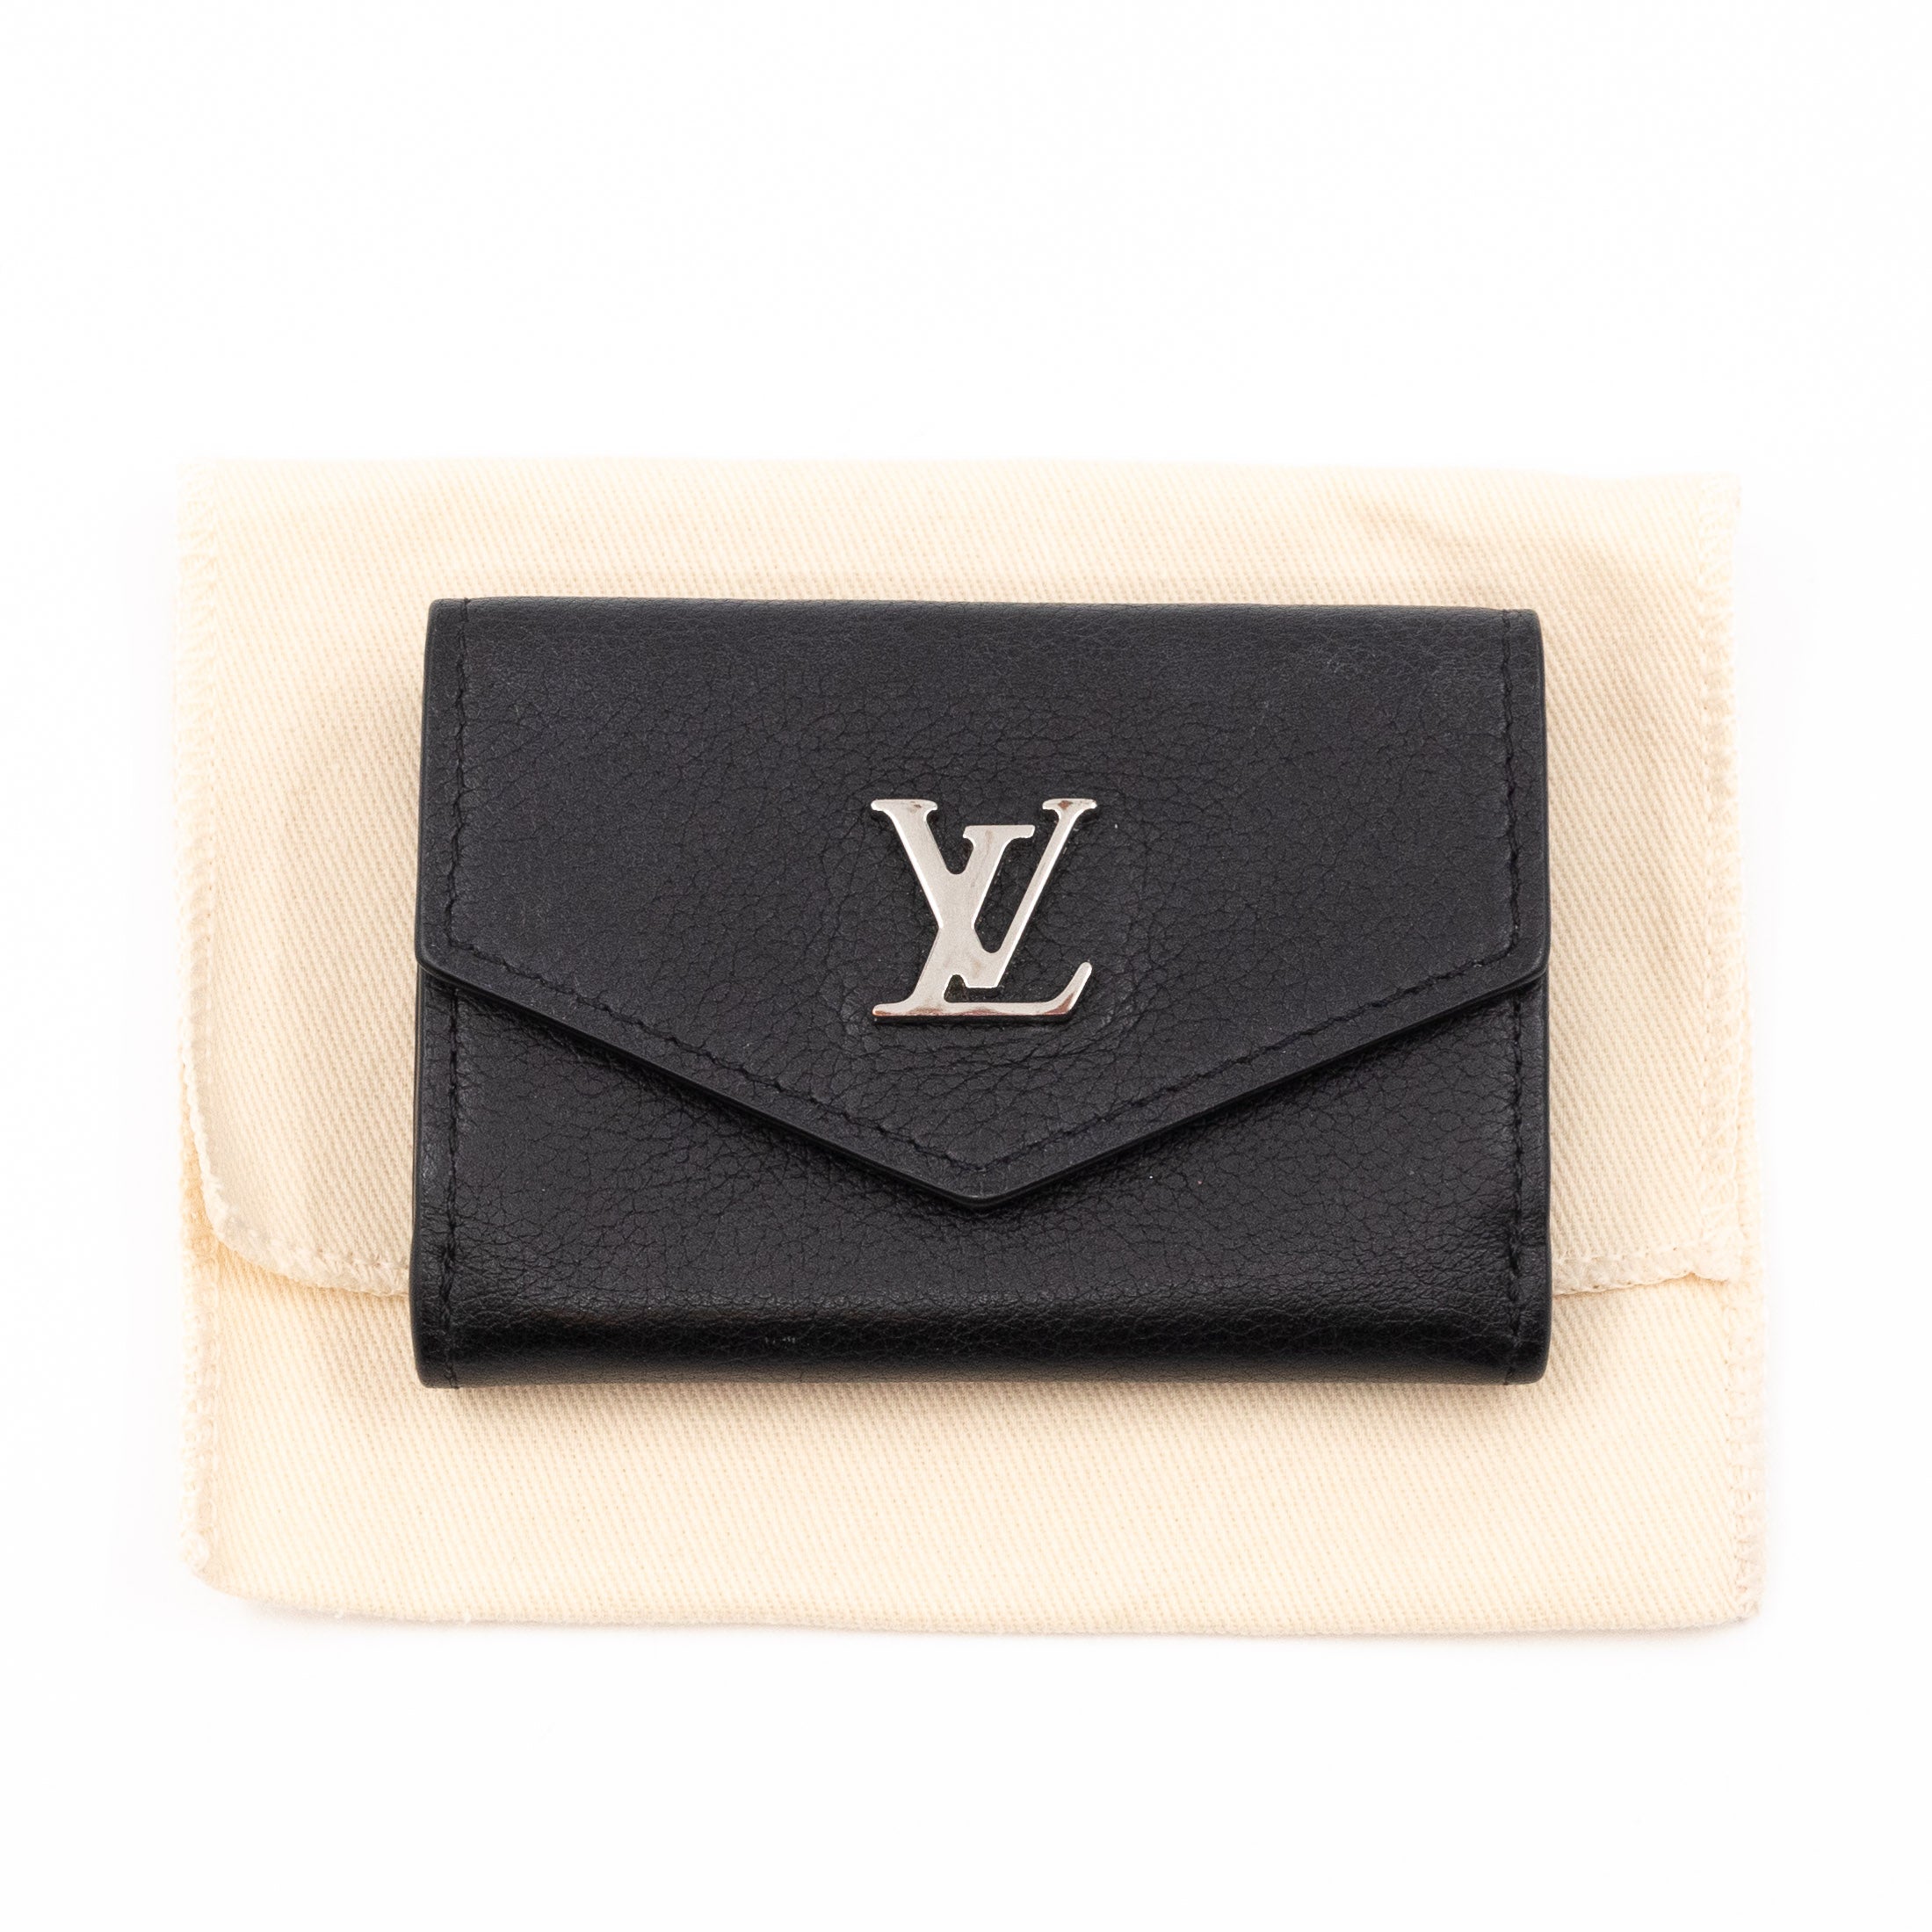 Authenticated Used Louis Vuitton Vernis Zippy Coin Purse Mini Wallet  Compact Women's No Palm Size Monogram Gold Metal Fittings Blue Nui Dark  Green M93663 